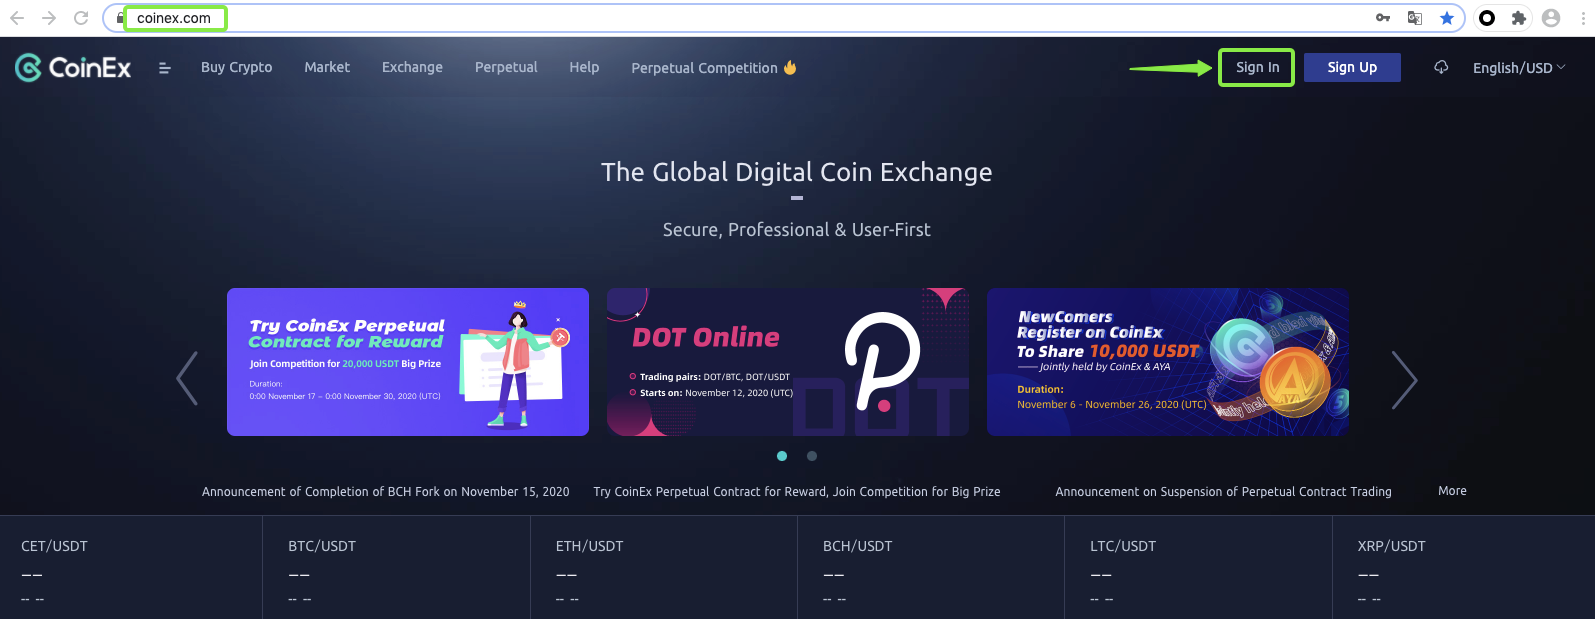 How to Reset or Find Back Sign-in Password in CoinEx